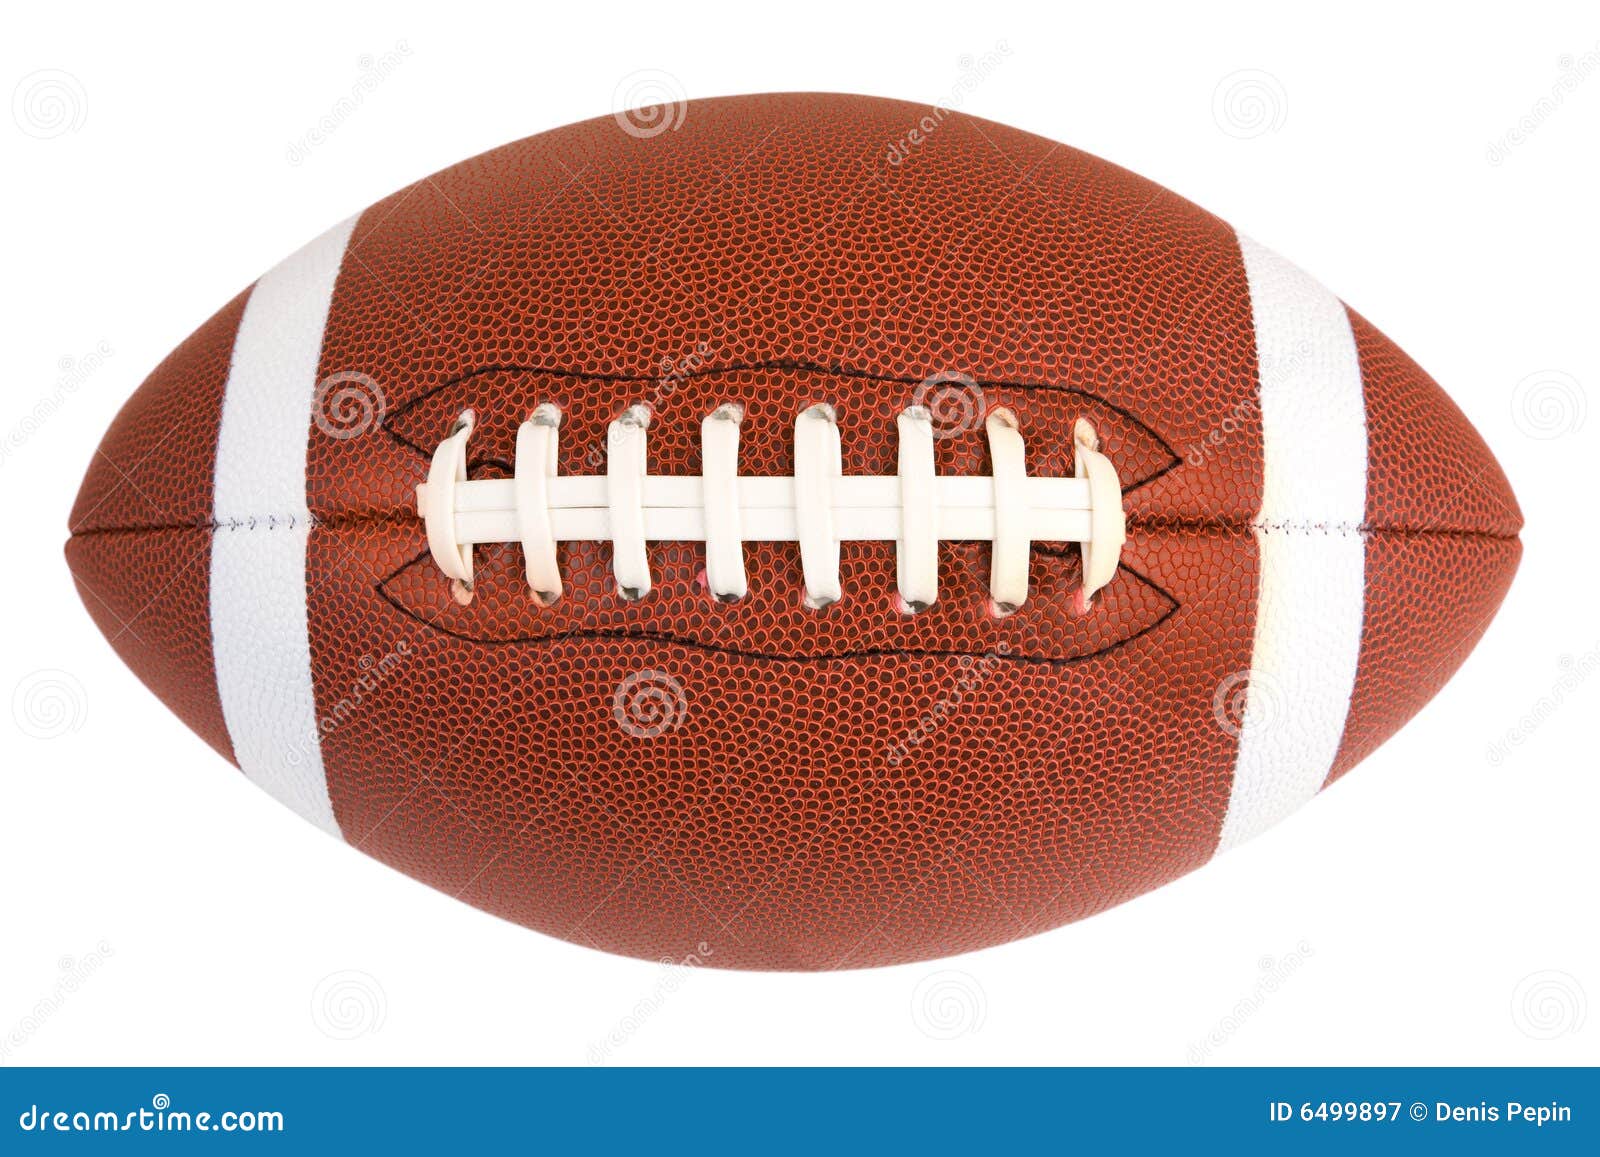 American Football stock image. Image of isolated, closeup - 6499897